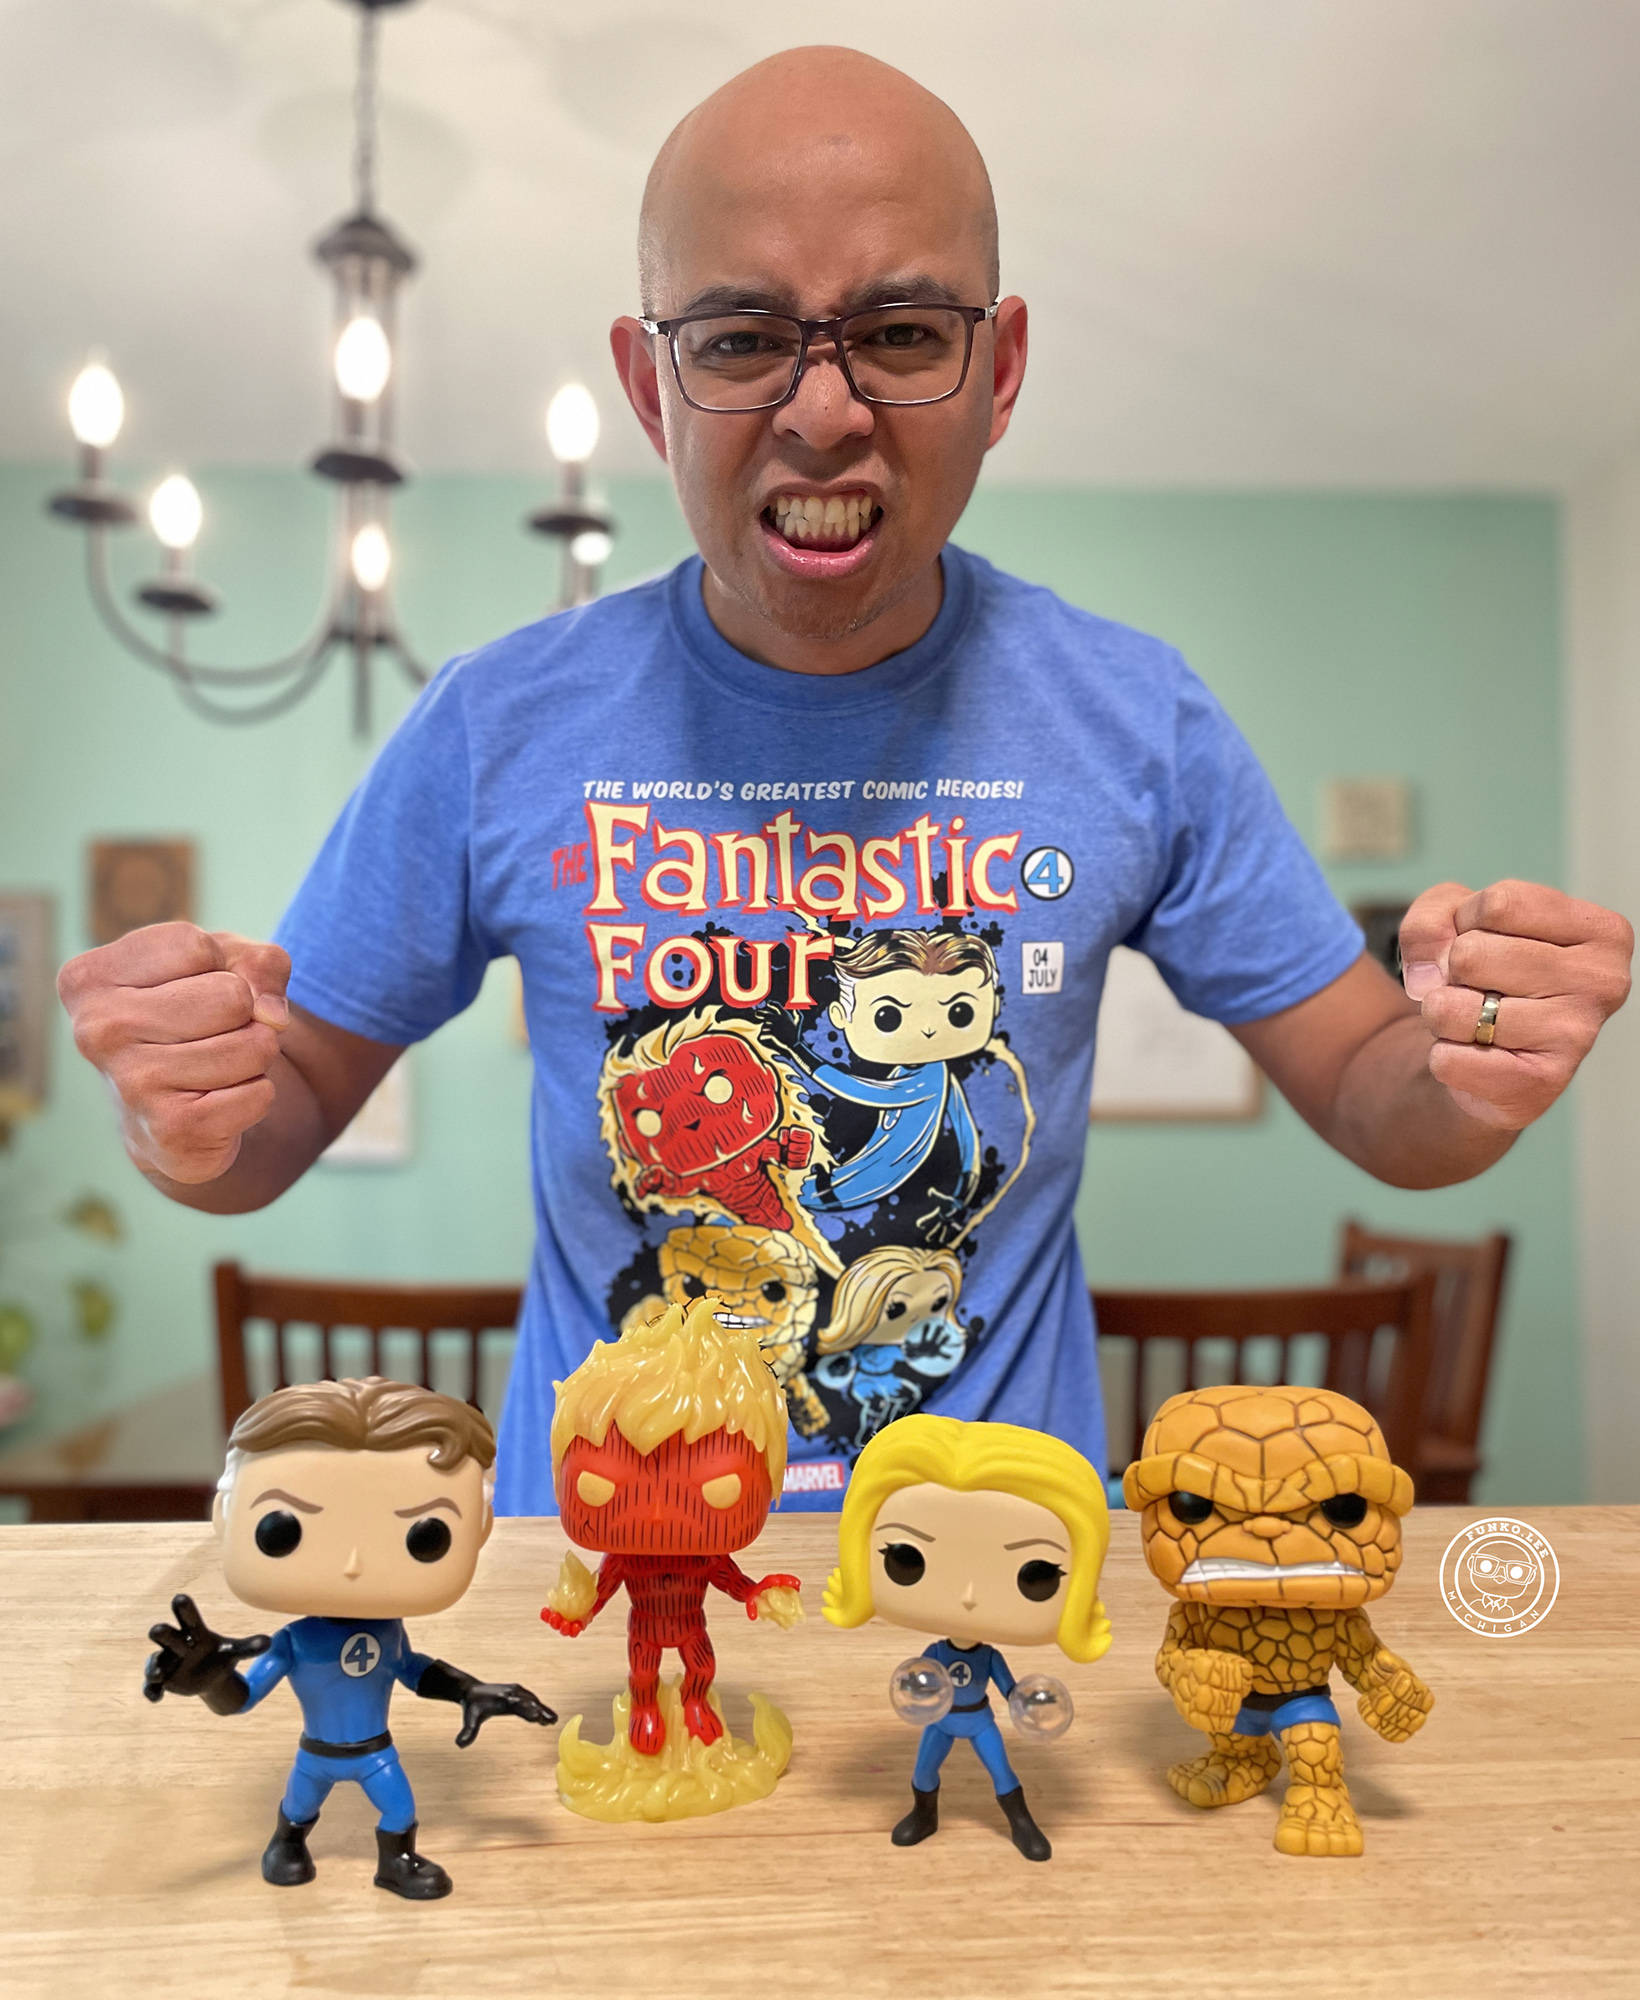 Lee with Fantastic Four Pops! and Tee (Marvel)